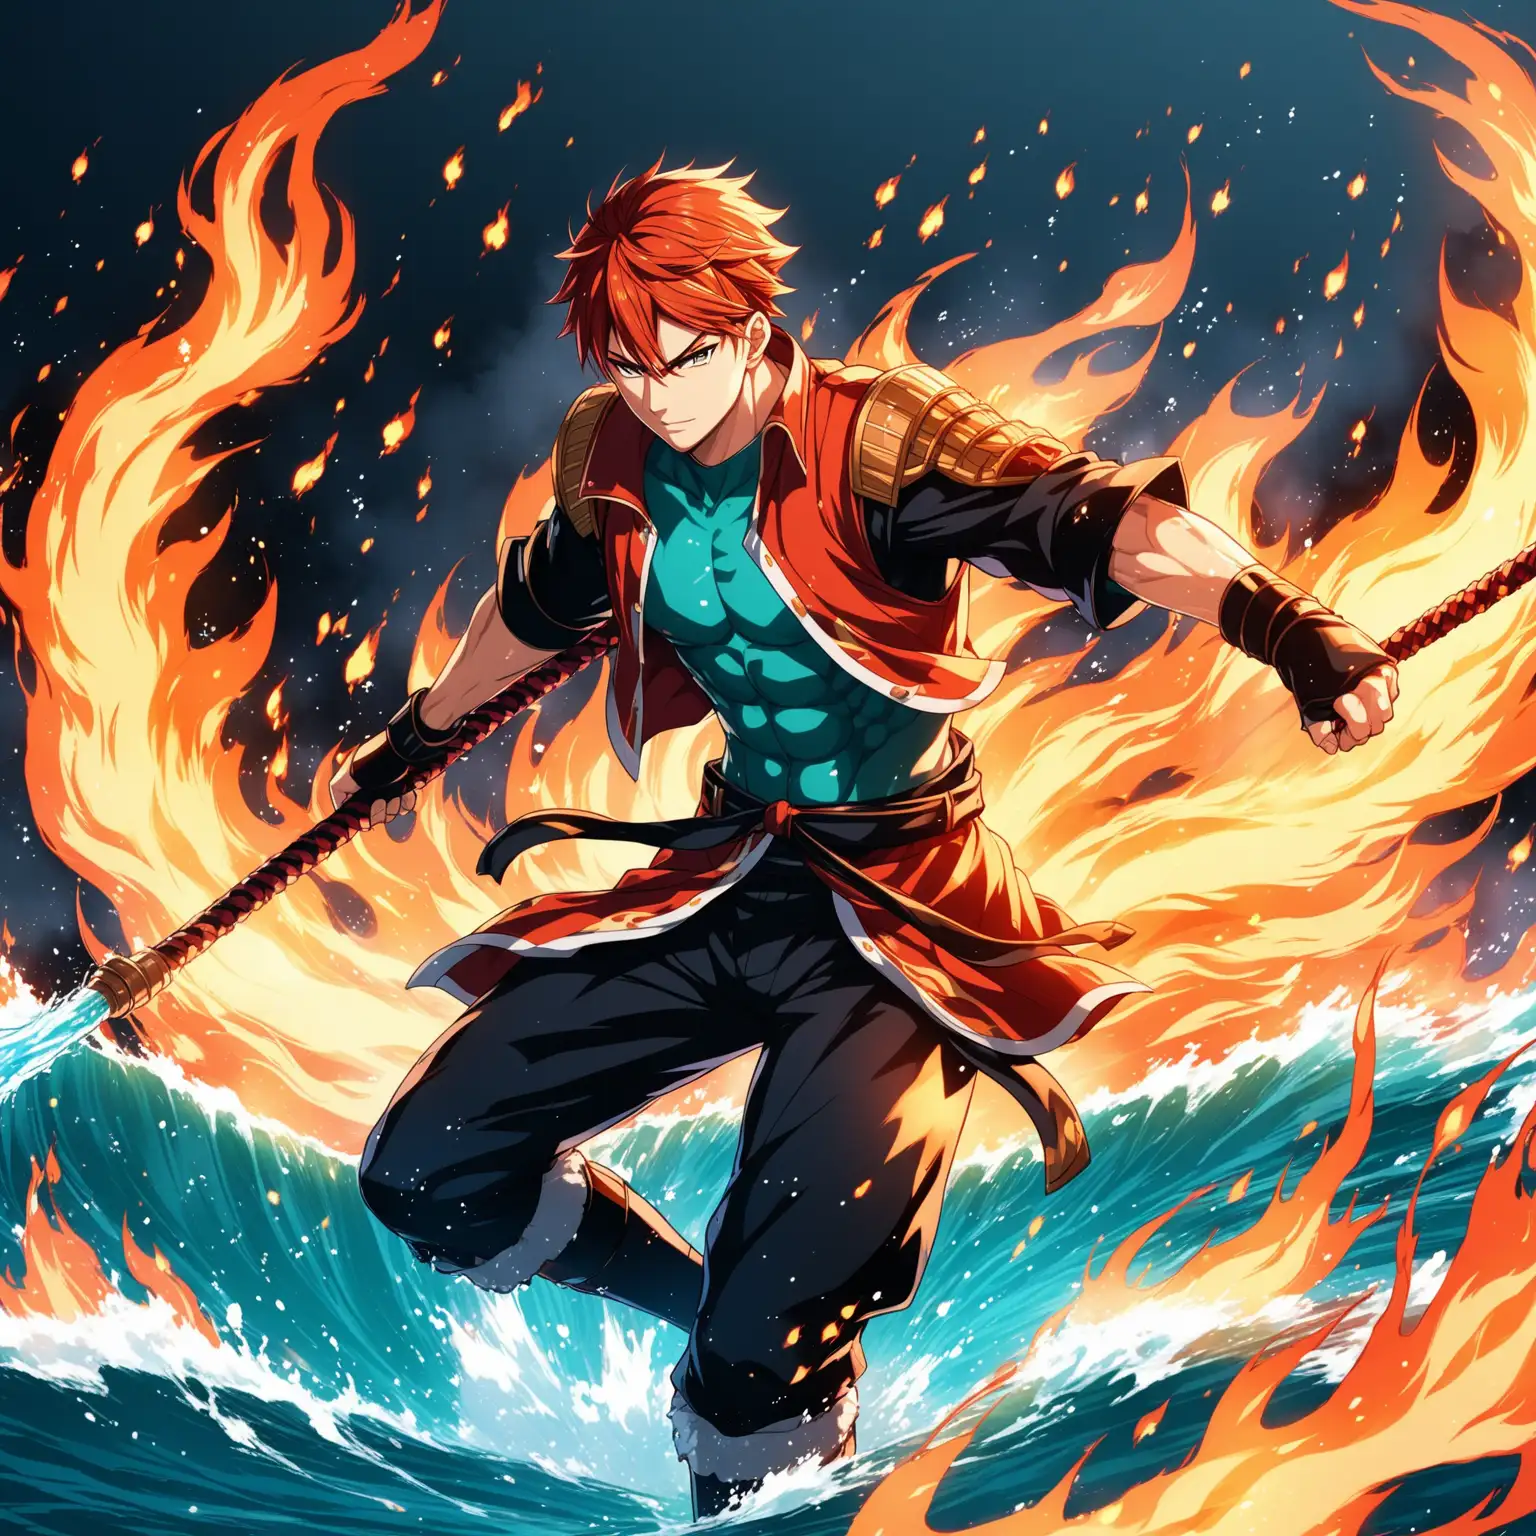 Epic Anime Battle Clash of Fire and Water in Stunning 8K Resolution